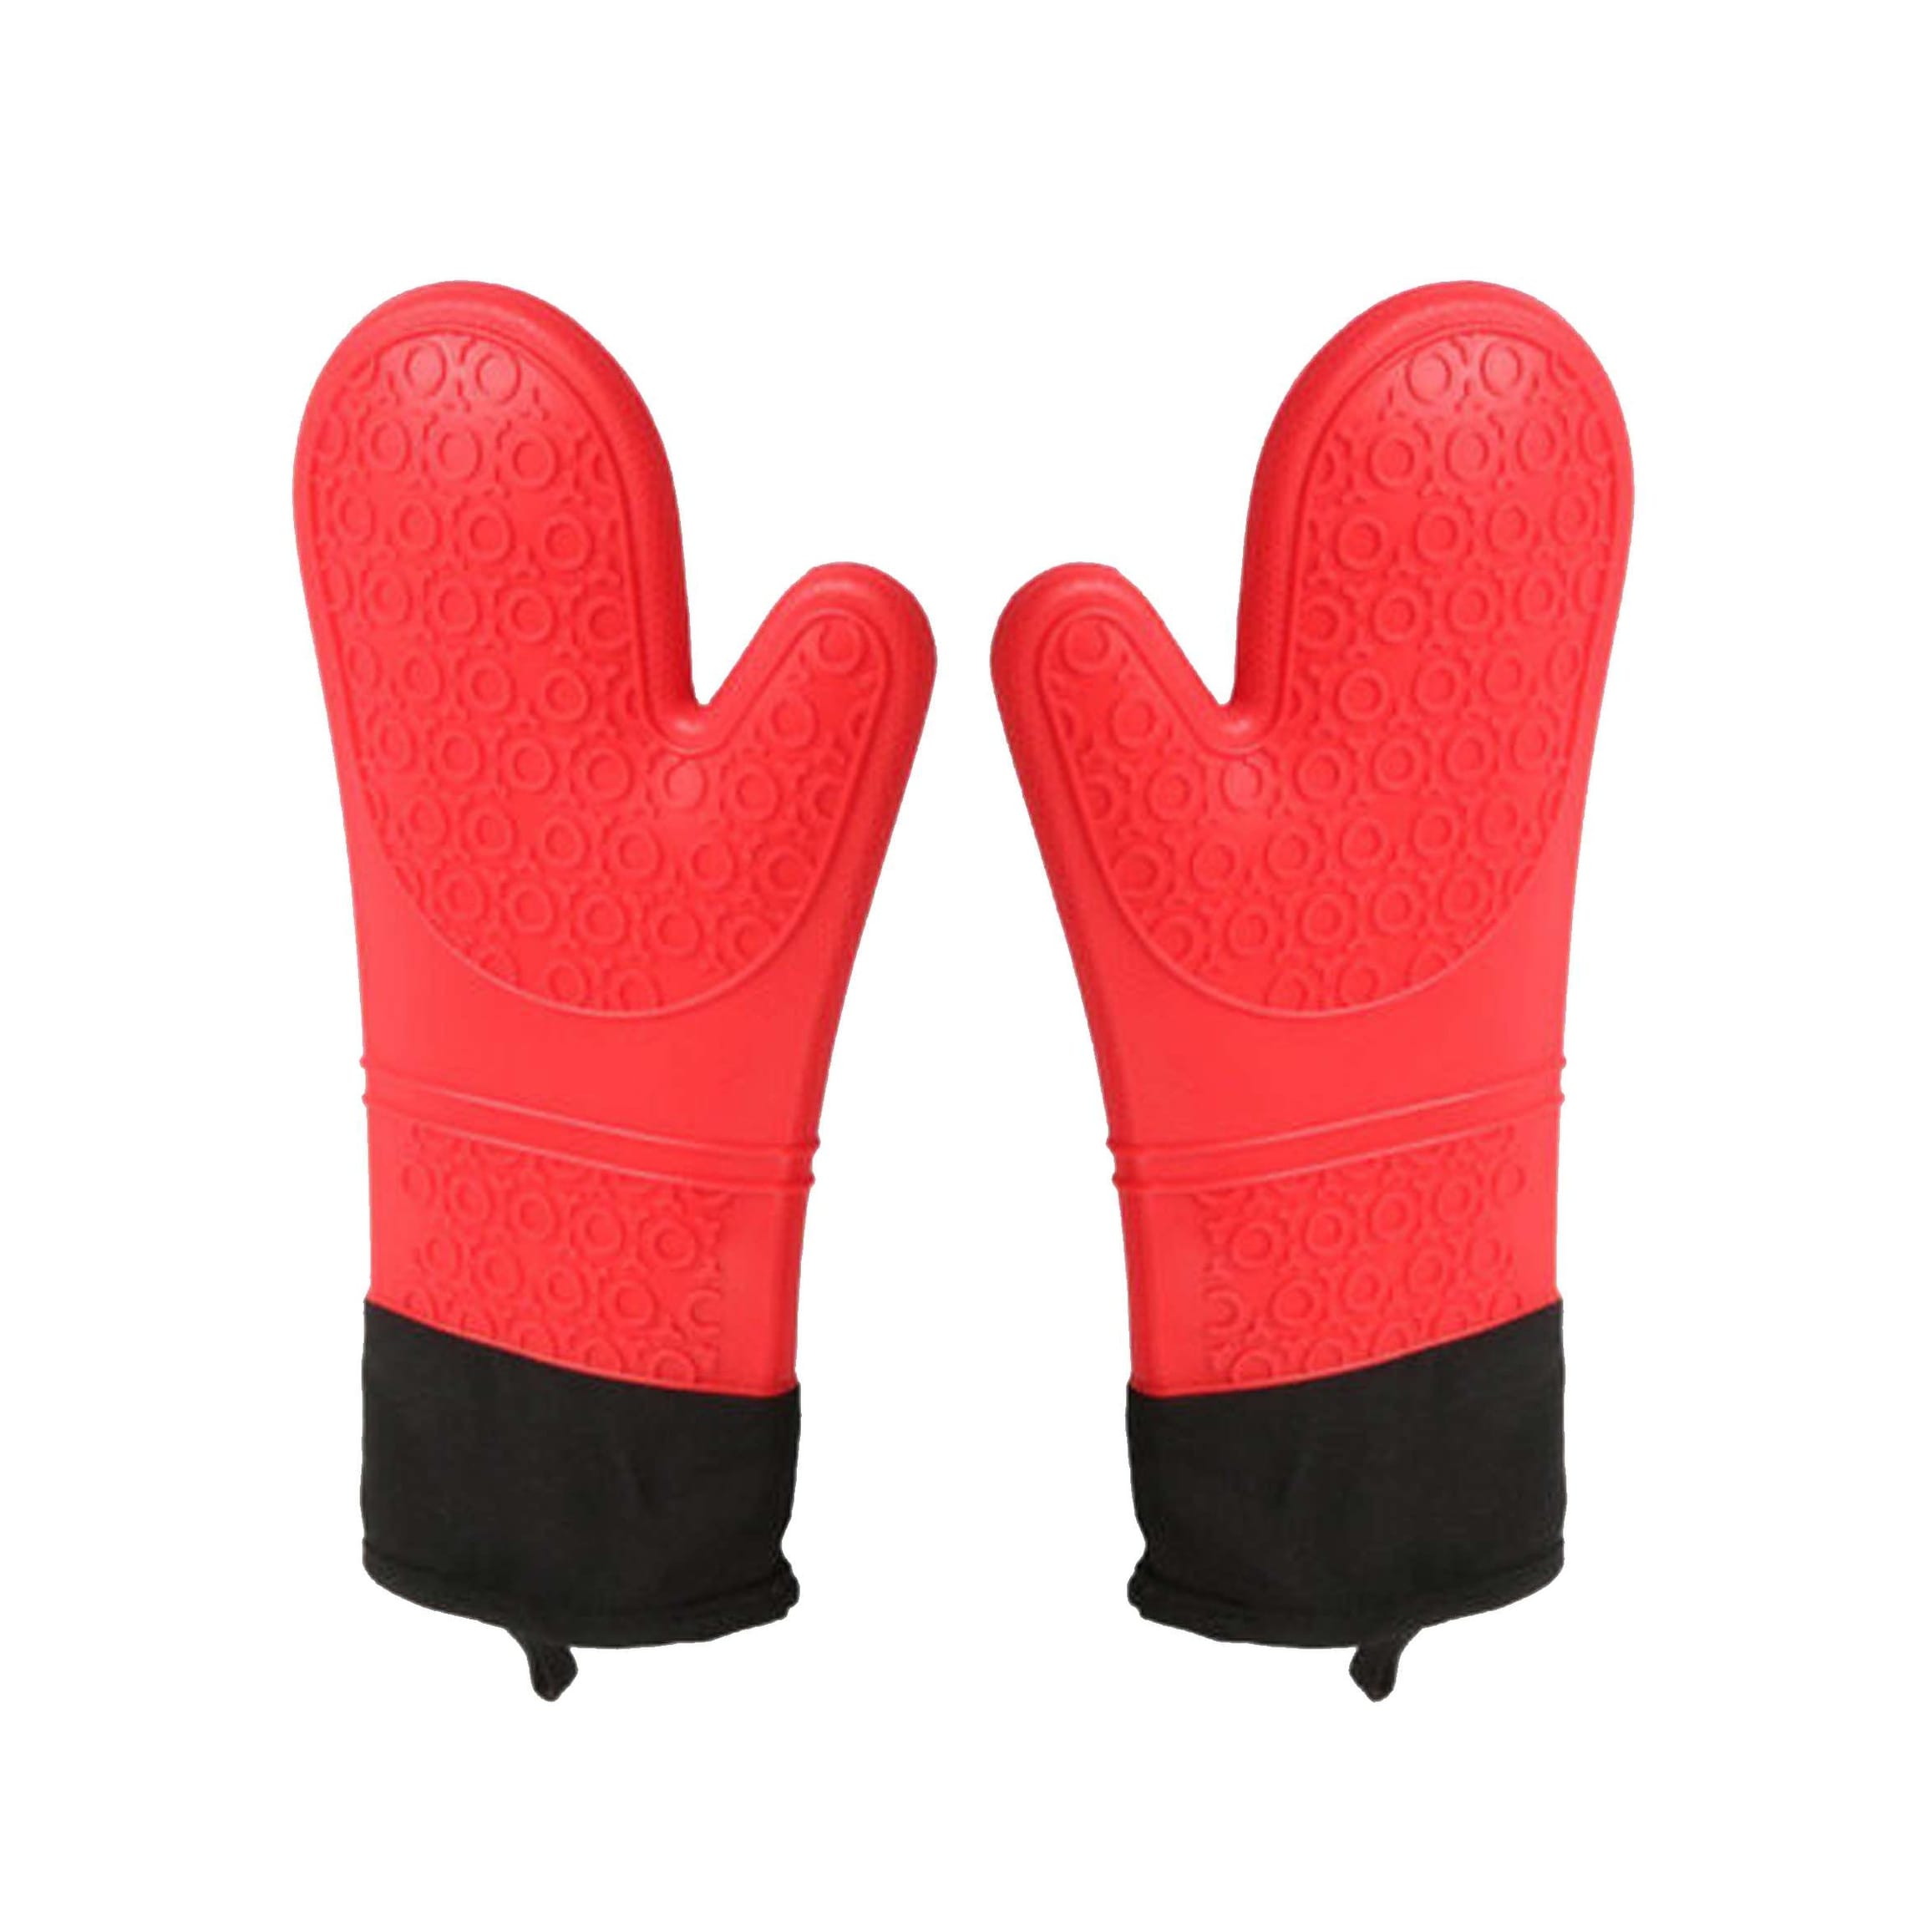 Neoprene Mini Oven Mitts, 2 Pack Heat Resistant Gloves Potholder to Protect Hands with Non-Slip Grip Surfaces and Hanging Loop for Handling Hot Pot